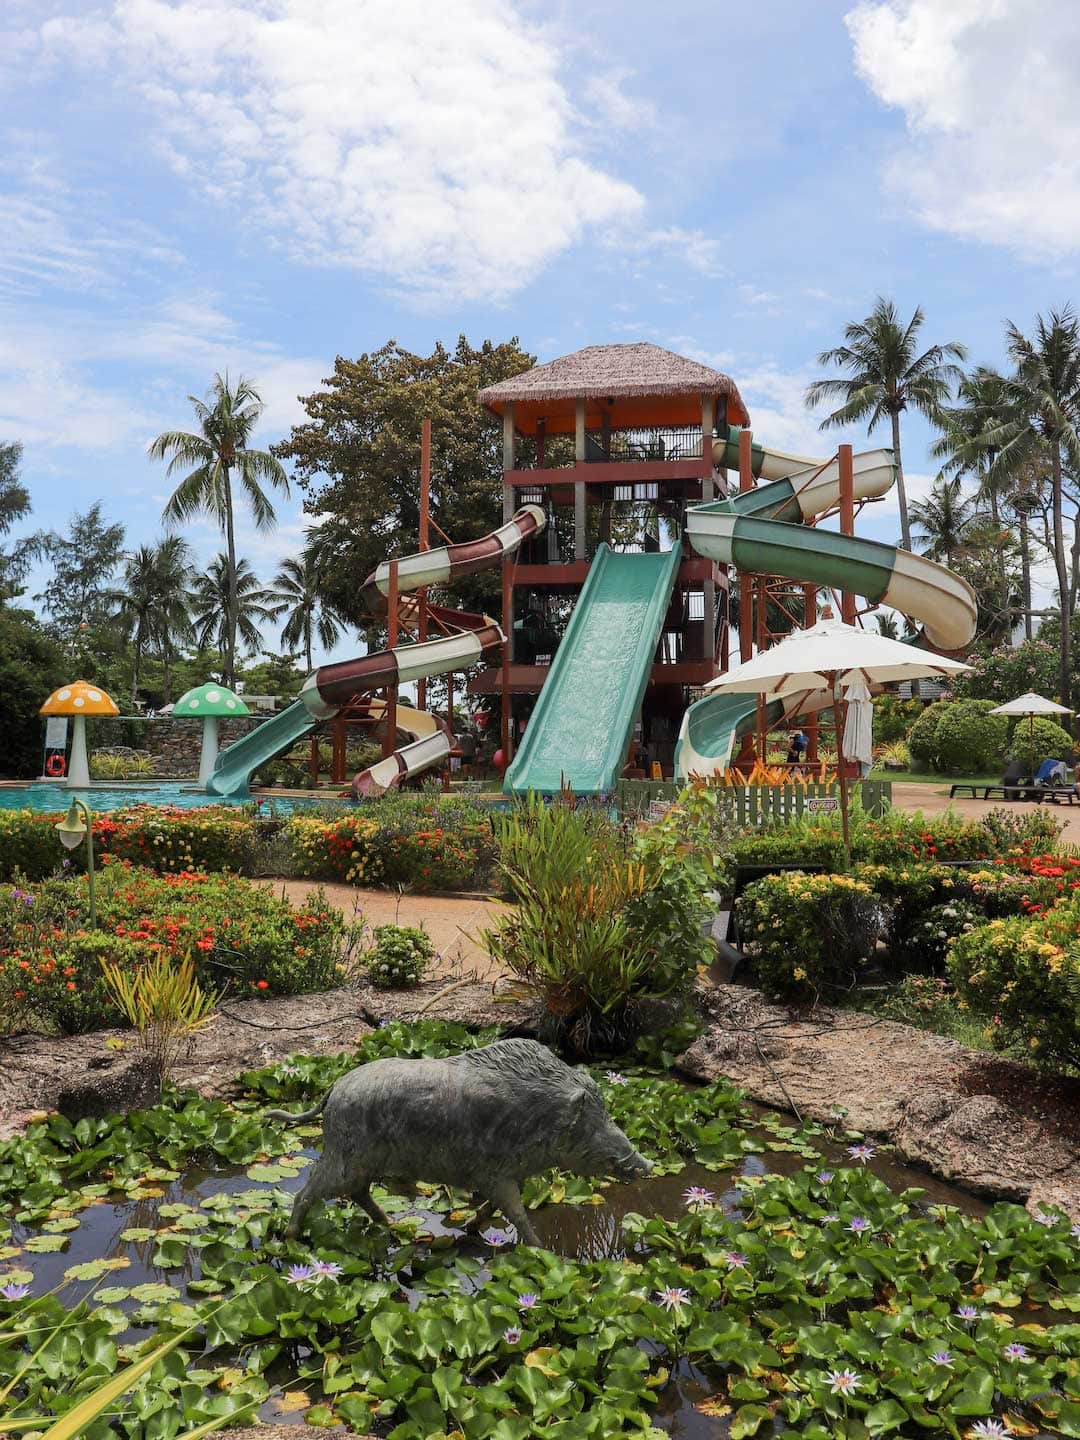 The water park at Palm Beach Resort